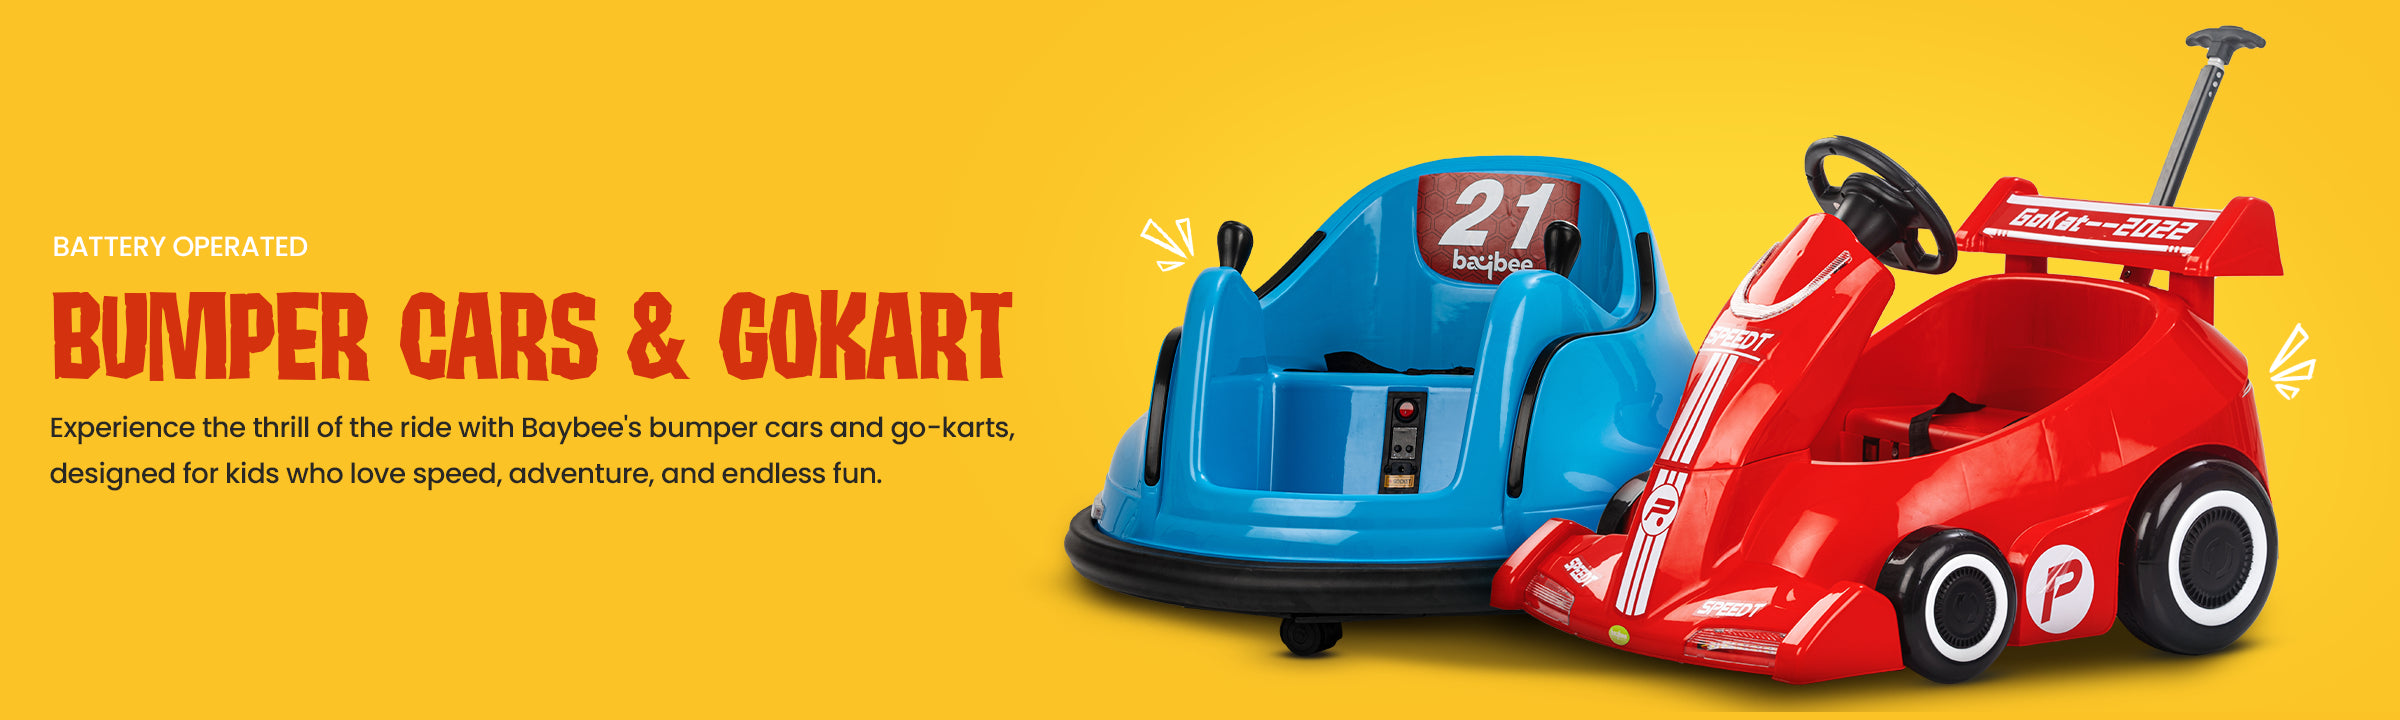 Experience the Thrill of Baybee Bumper Cars & Go-Karts